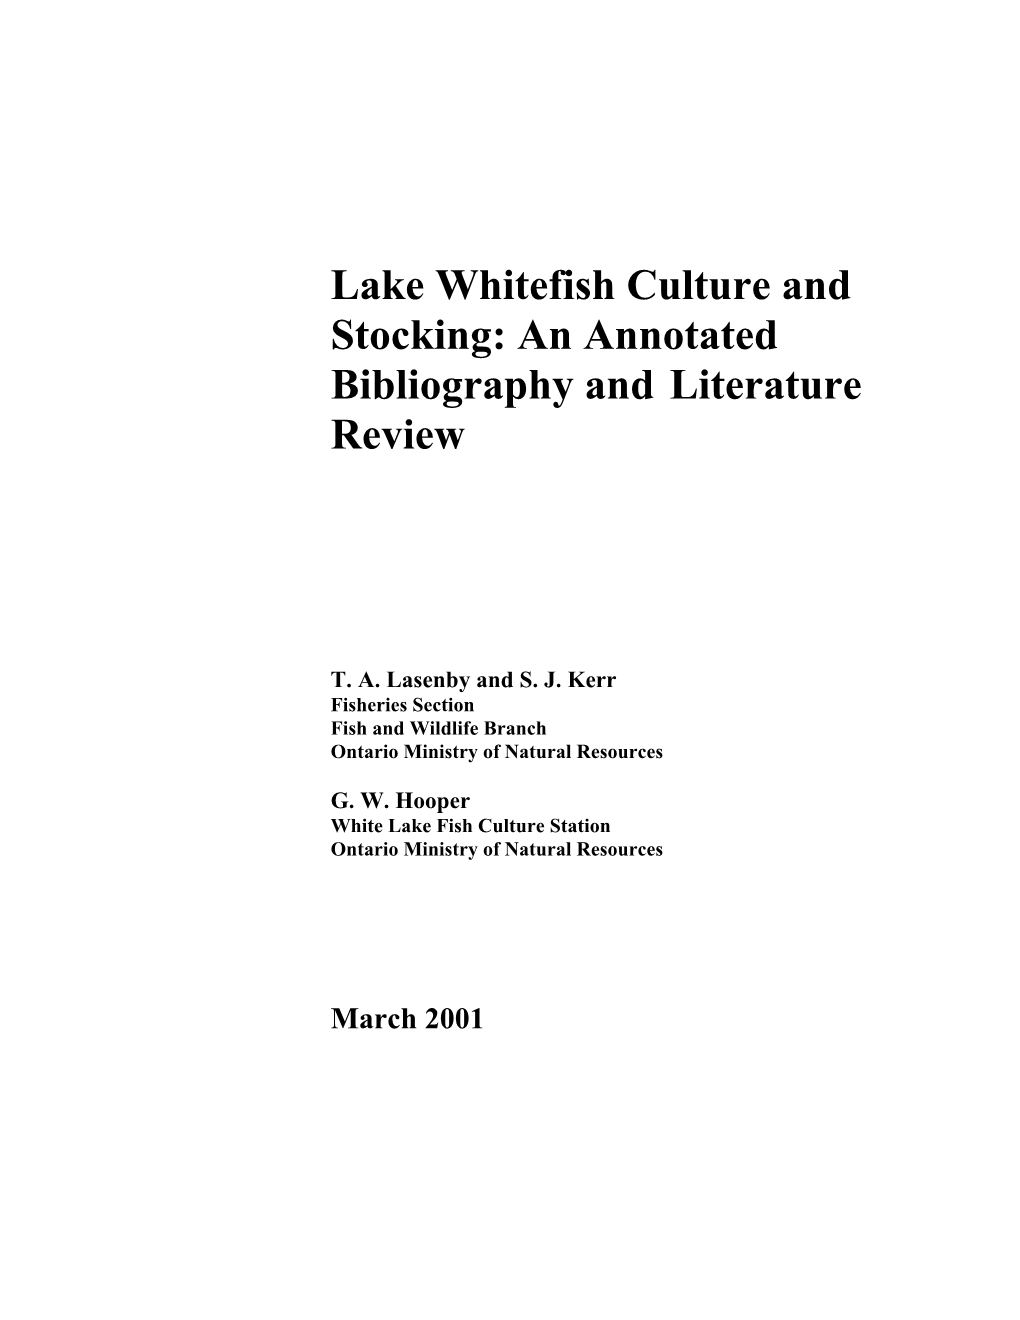 Lake Whitefish Culture and Stocking: an Annotated Bibliography and Literature Review